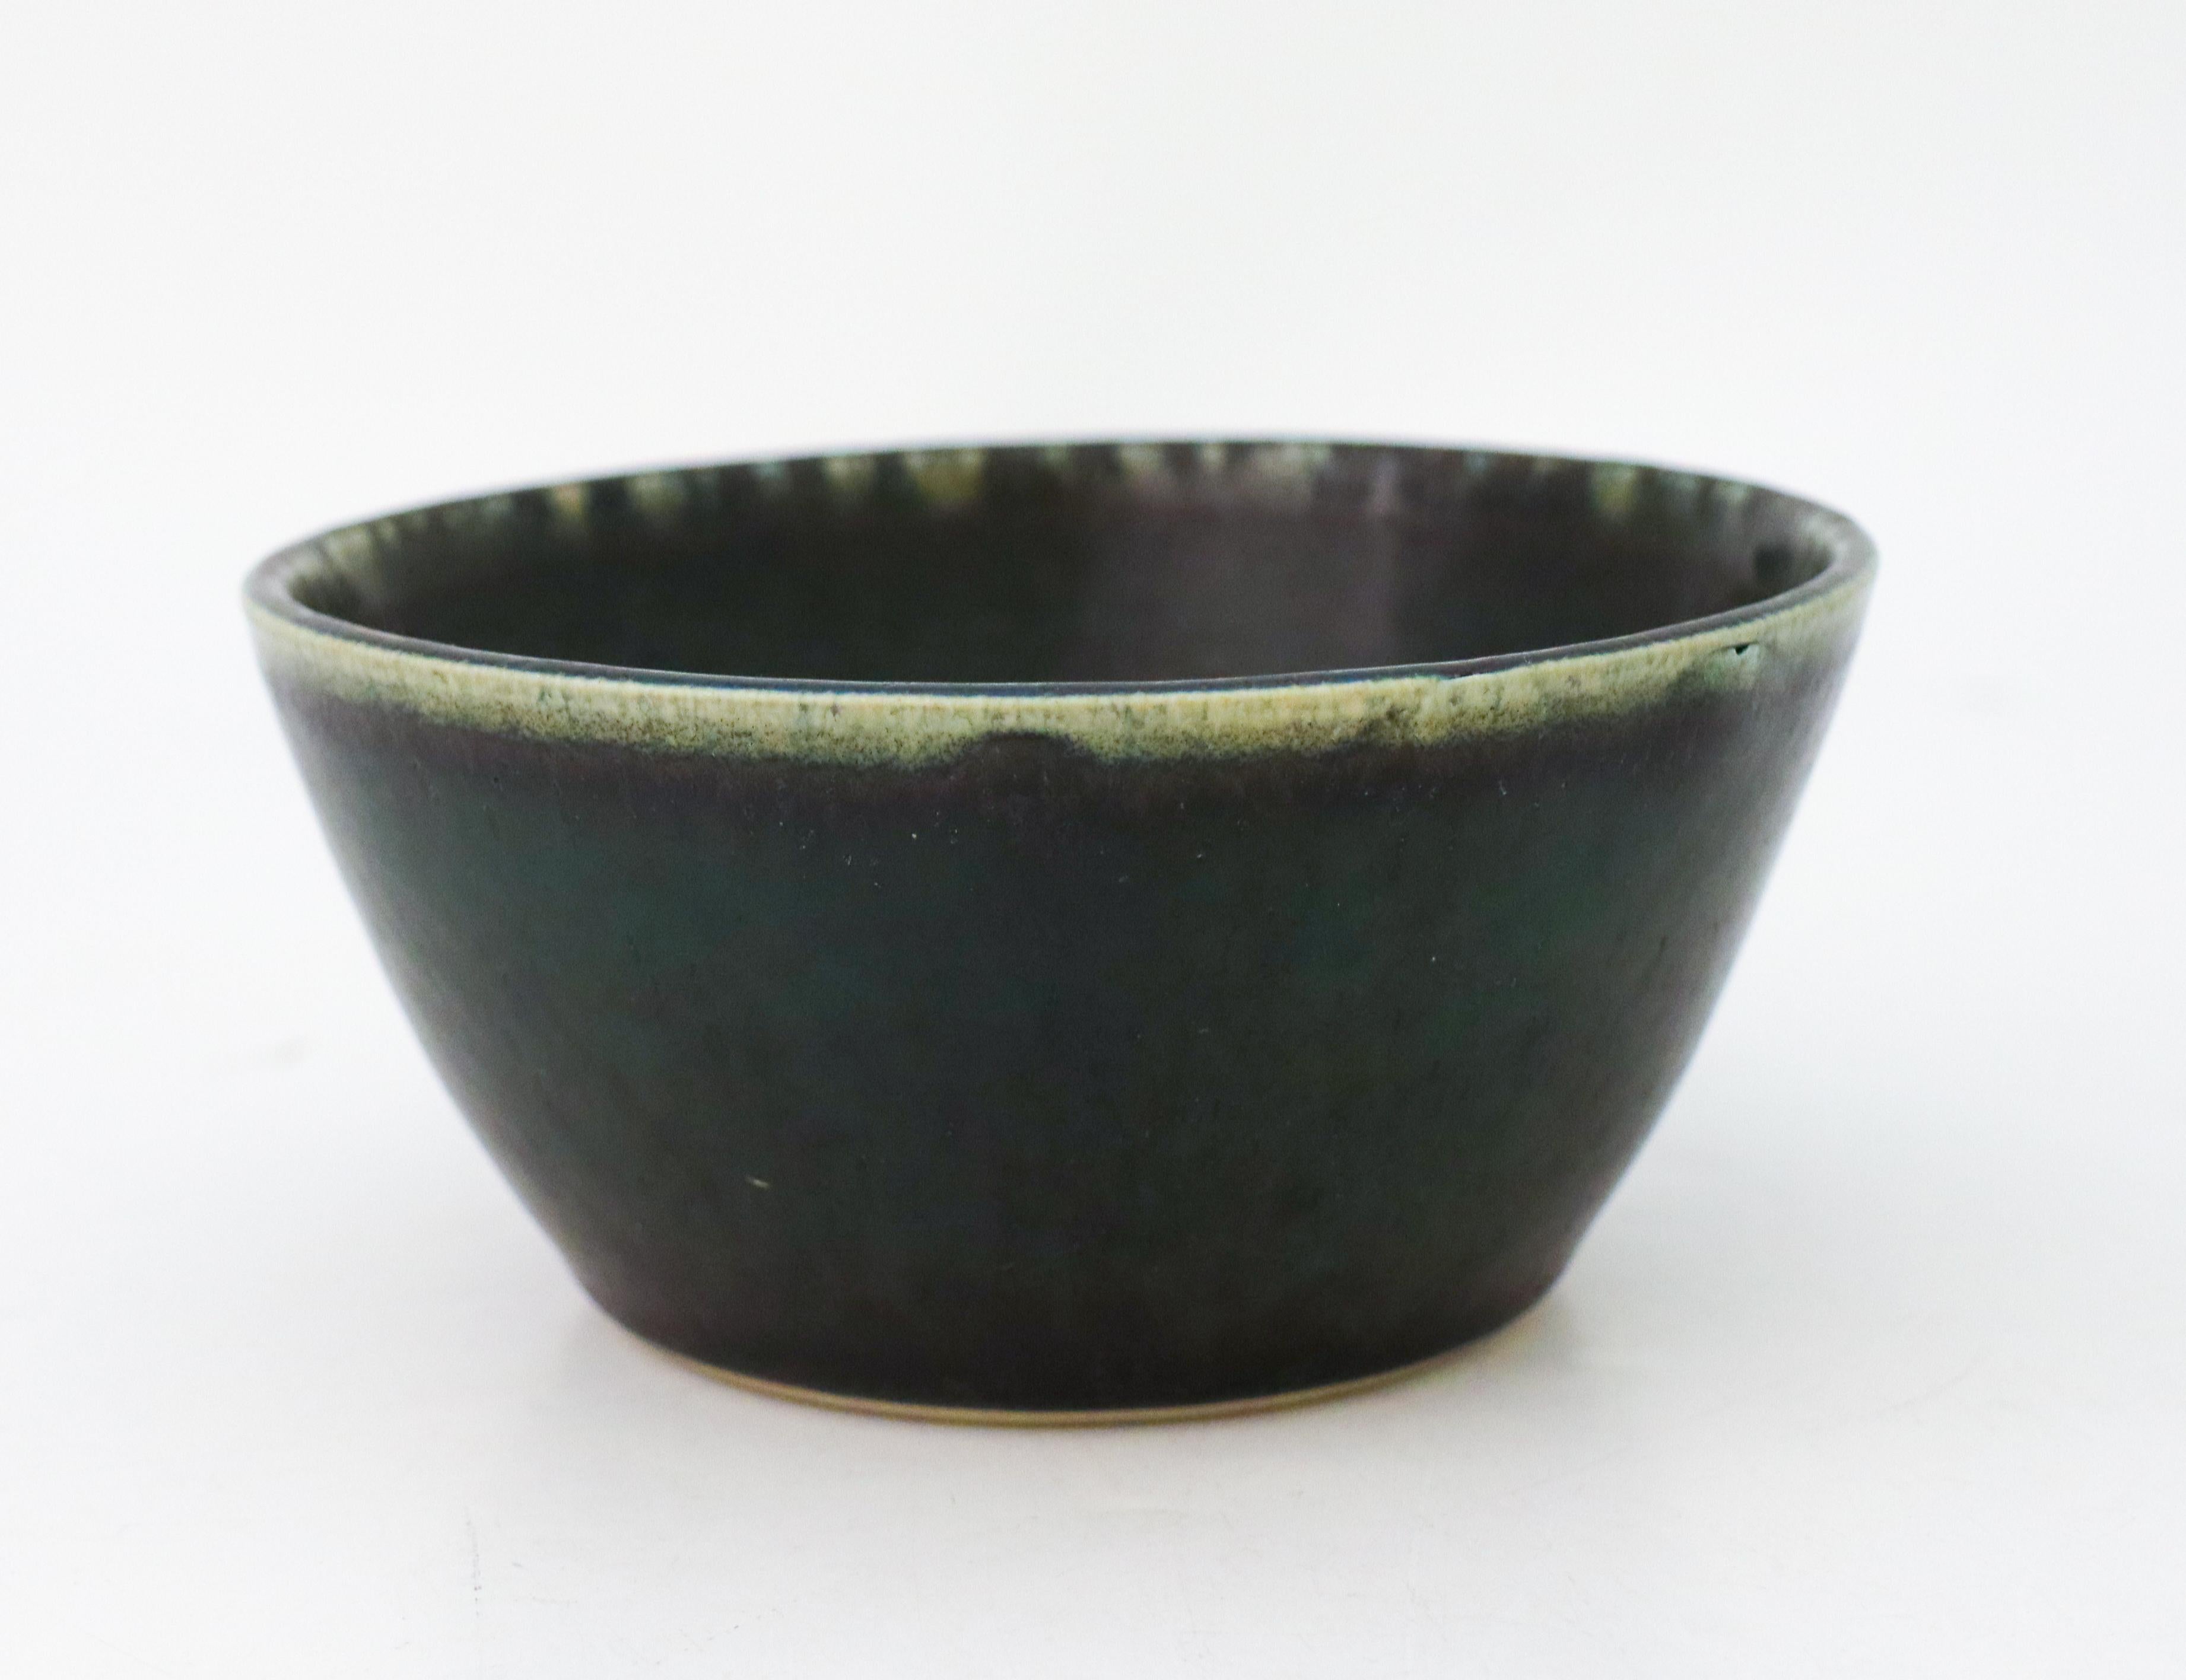 A round, green ceramic bowl designed by Carl-Harry Stålhane at Rörstrand, the bowl is 13,5 cm (5.4